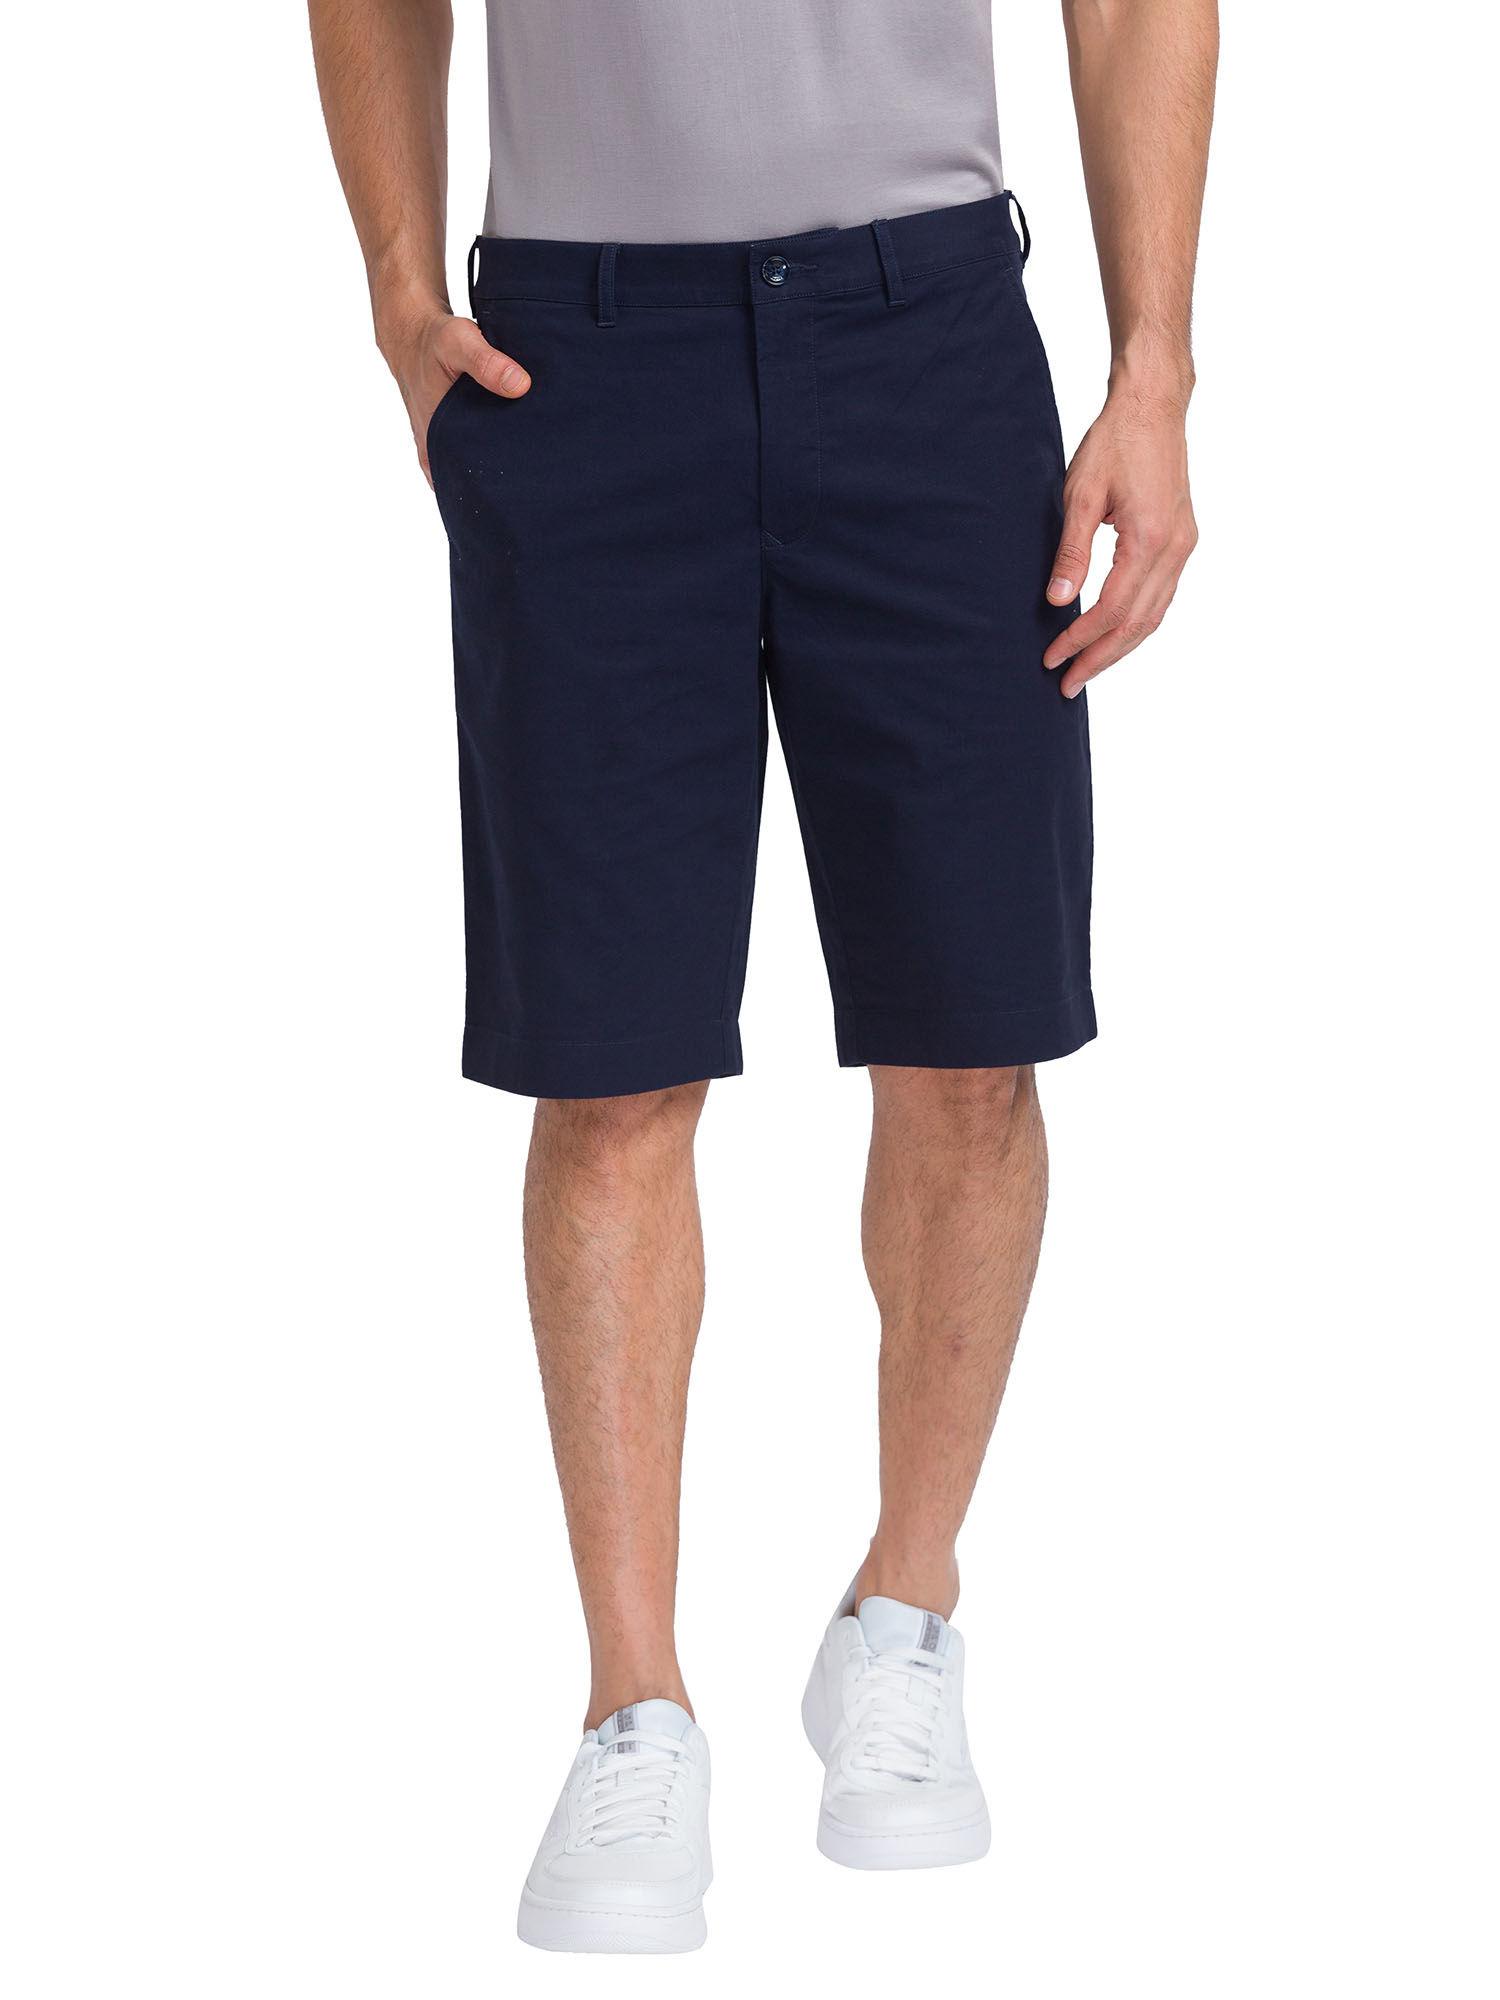 comfortable fit solid navy blue shorts